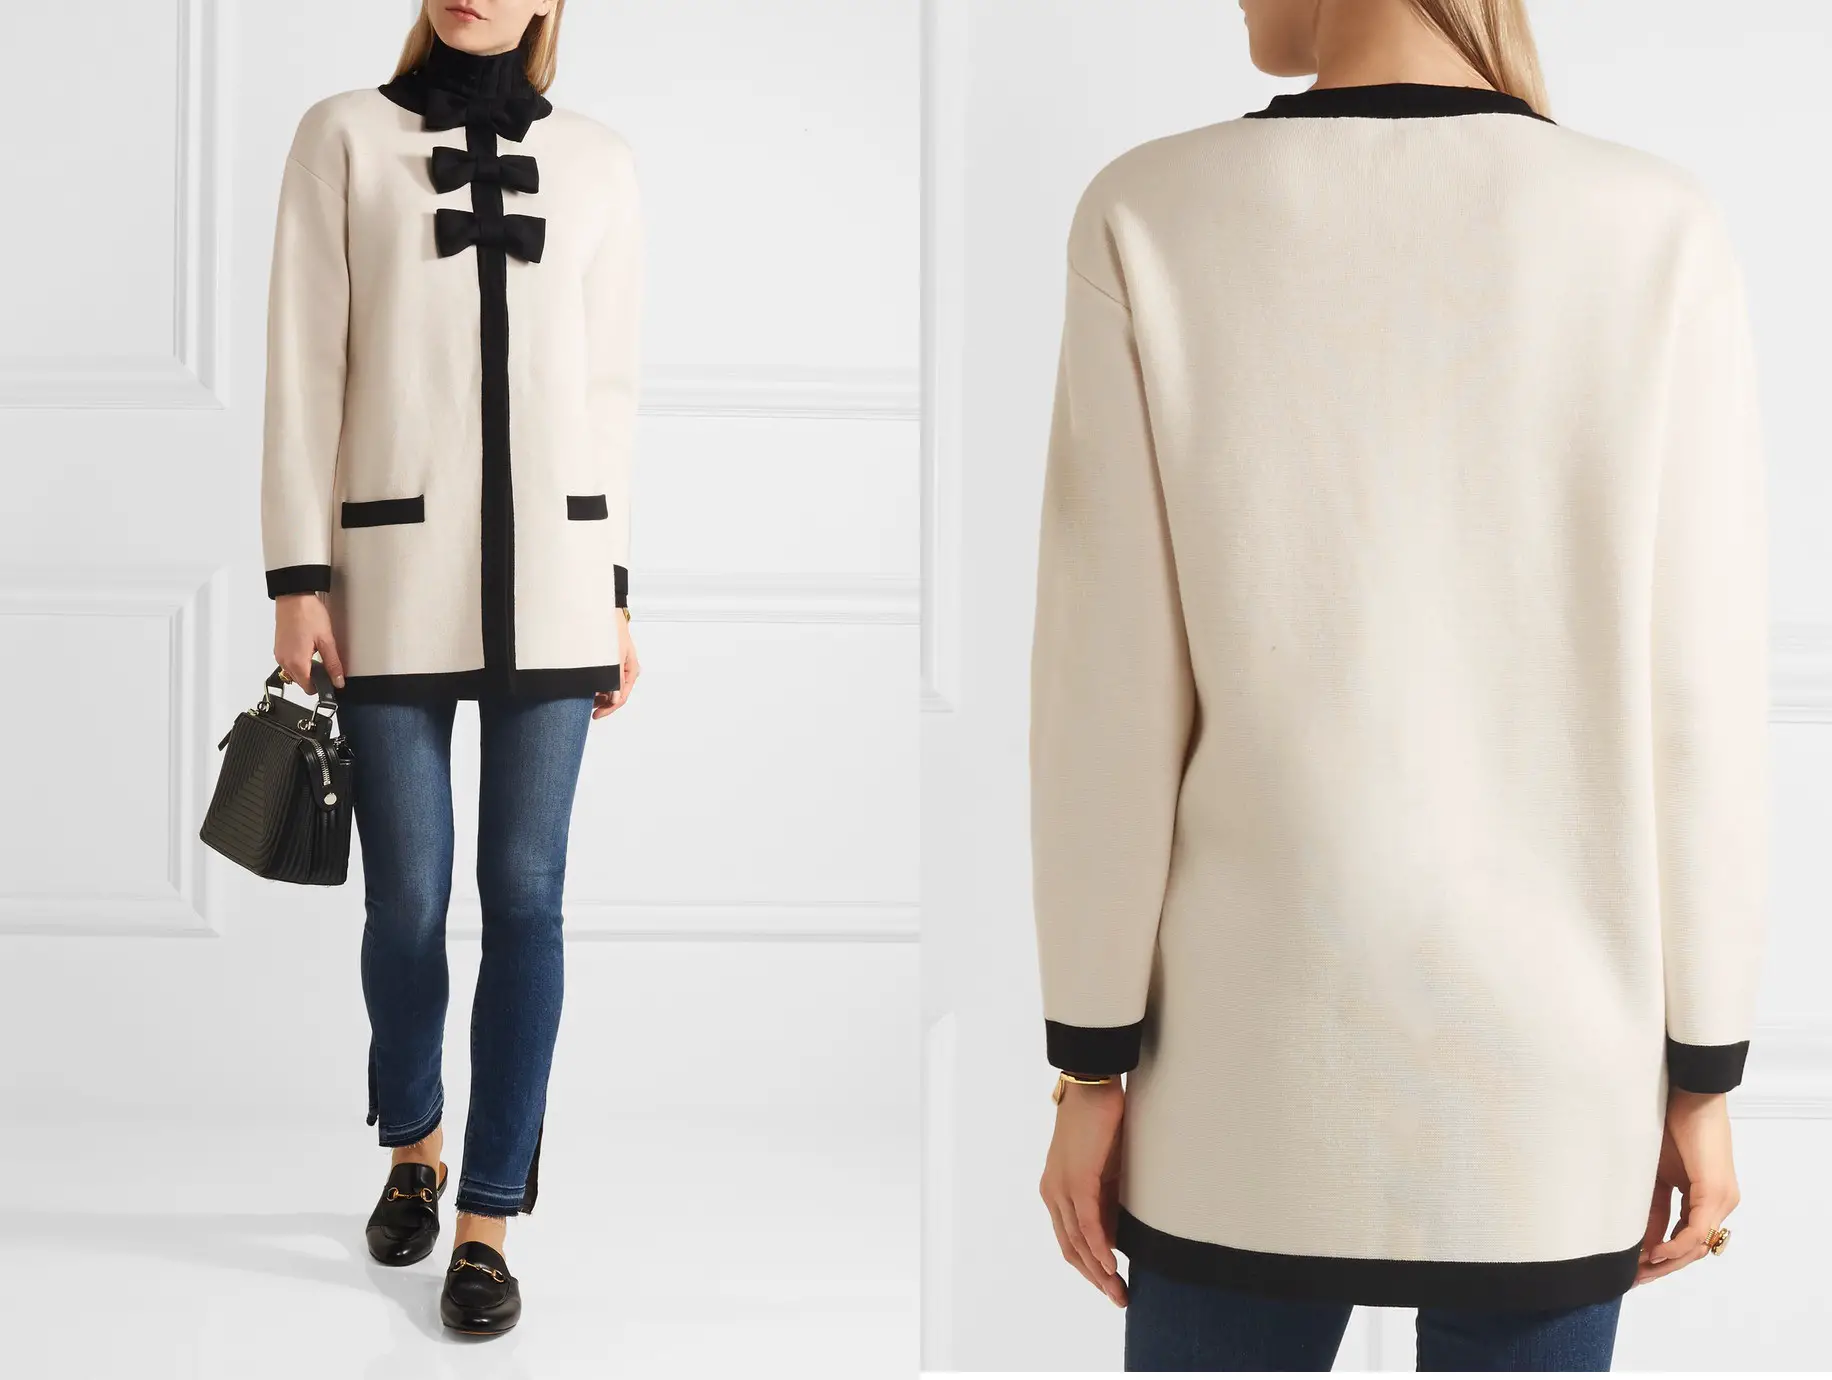 Duchess of Cambridge Boutique Moschino Bow-Embellished Wool and Cotton-Blend Jacket